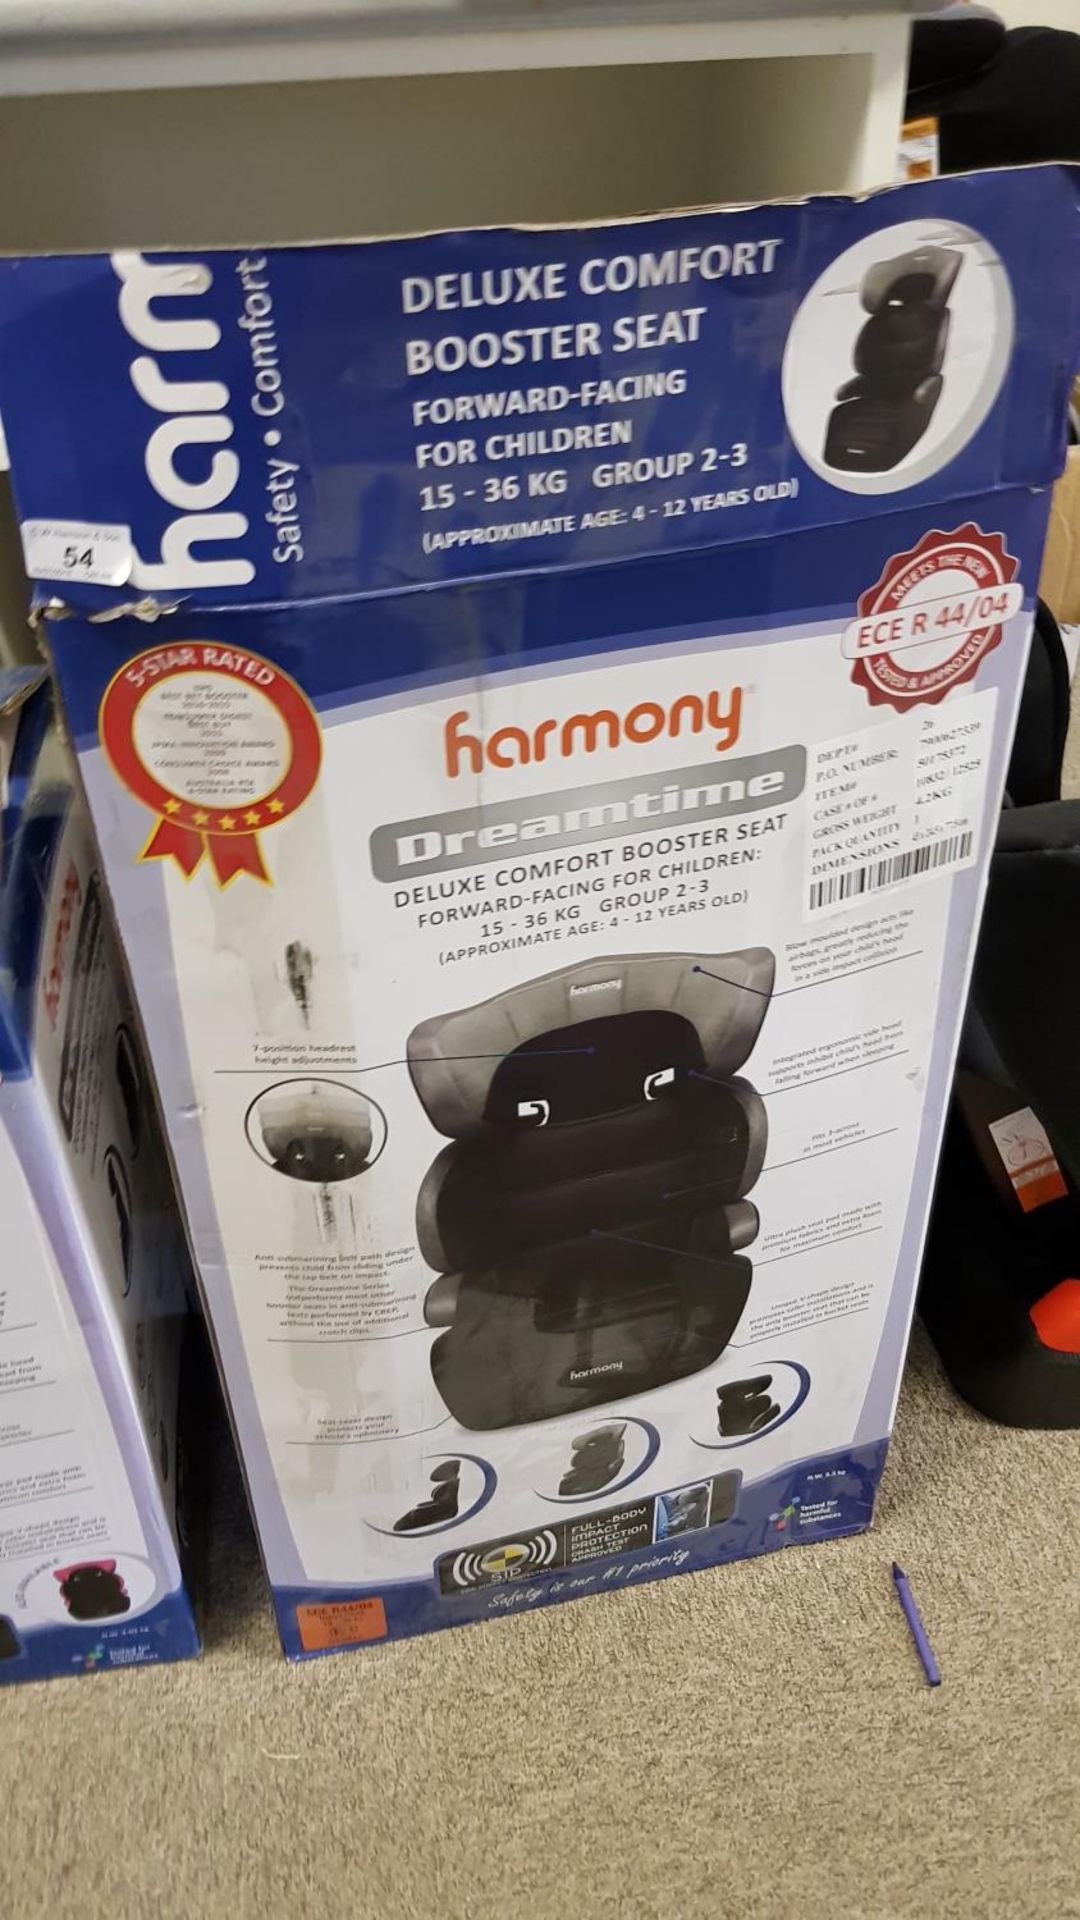 Harmony Dreamtimer Deluxe Comfort Booster Seat (Group 2-3) – Black